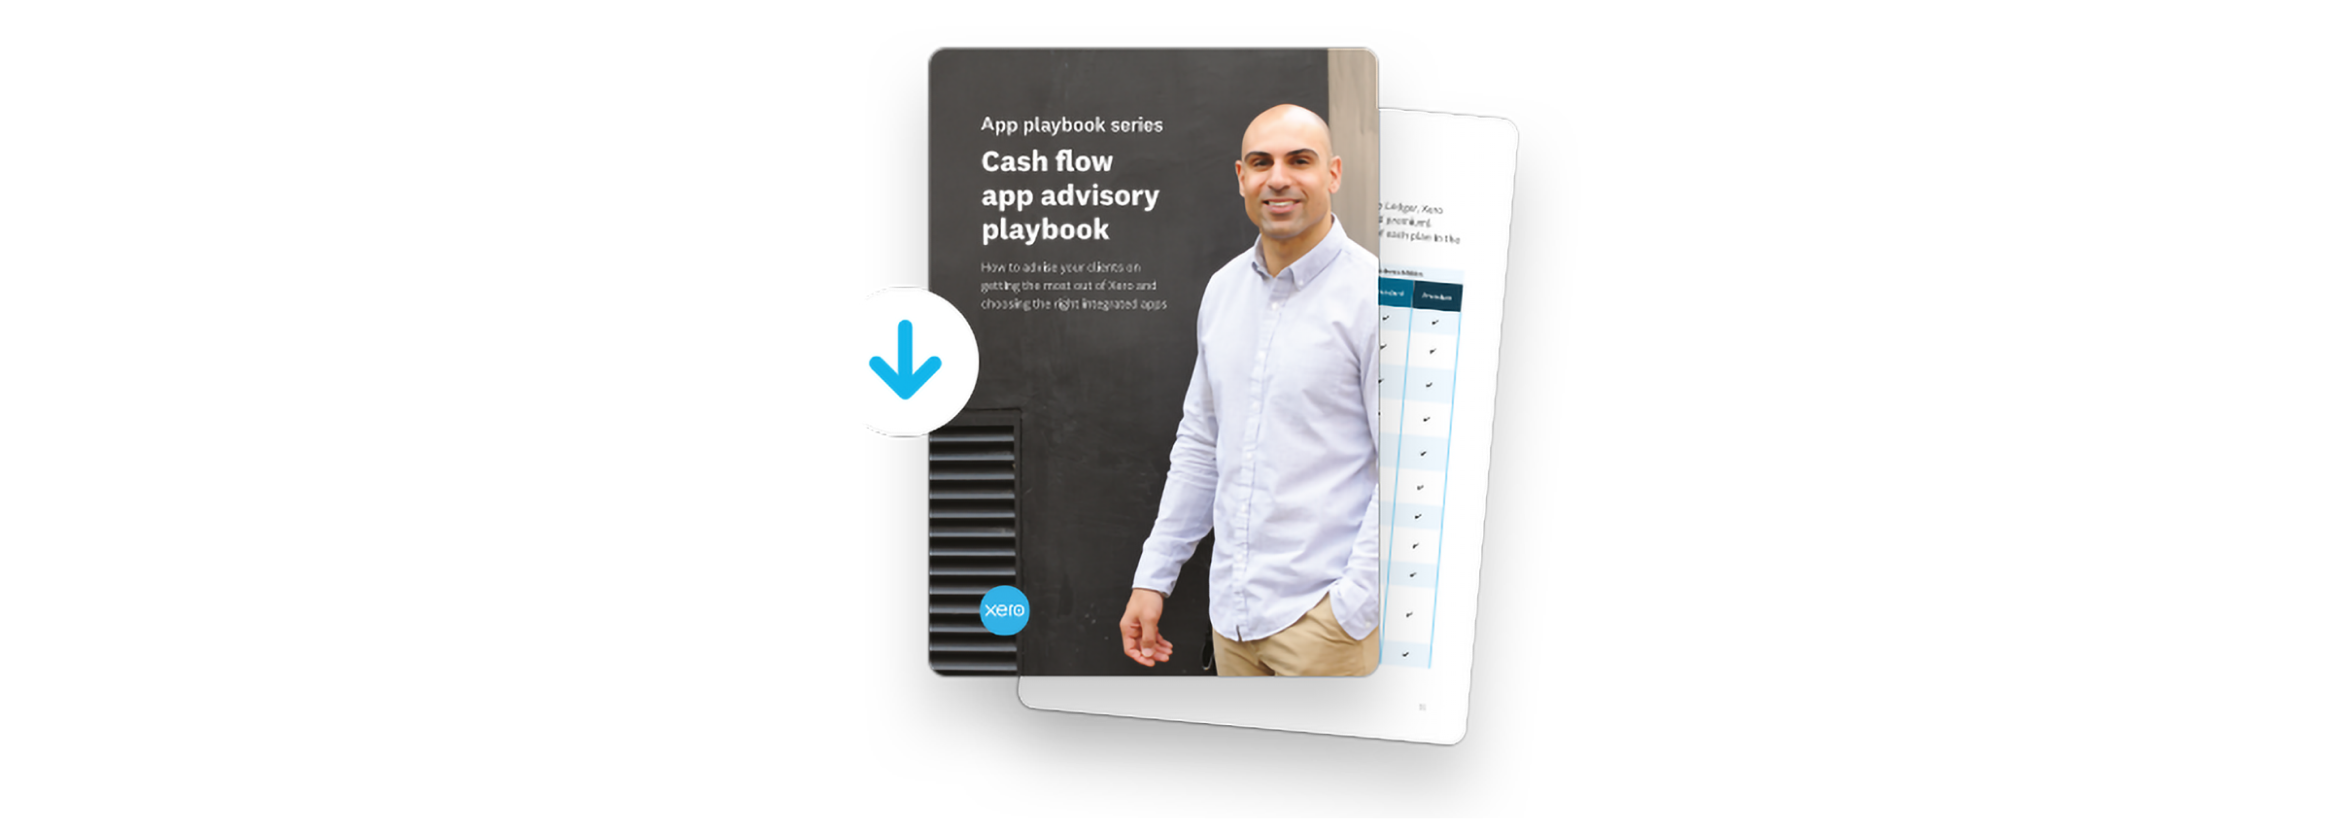 The opening screen of the cash flow app advisory playbook.